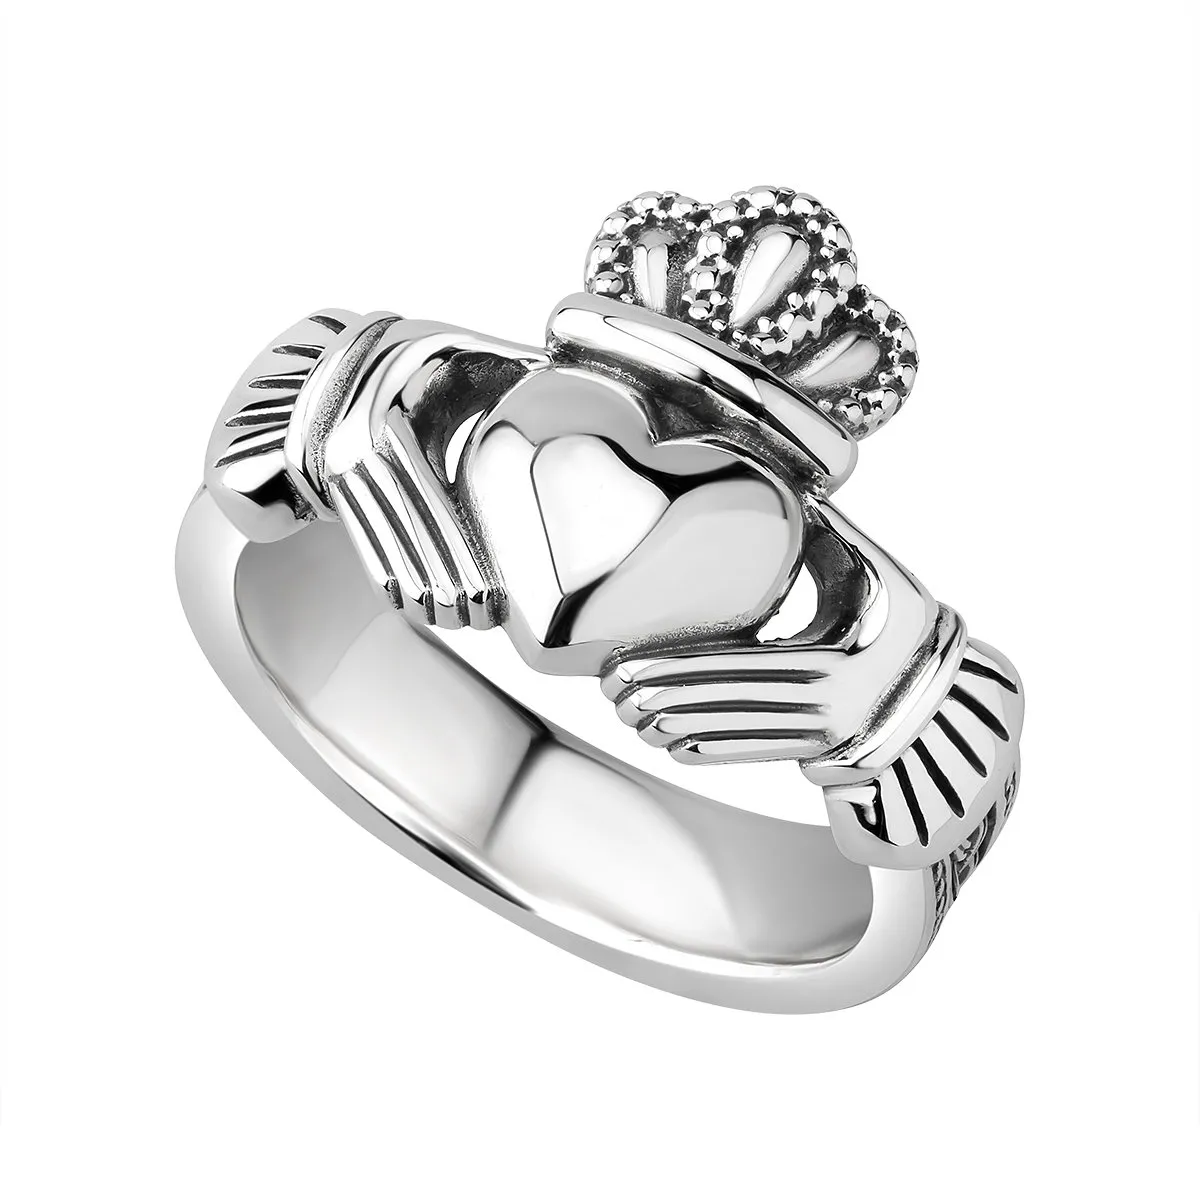 Gents Silver Heavy Celtic Claddagh Ring...